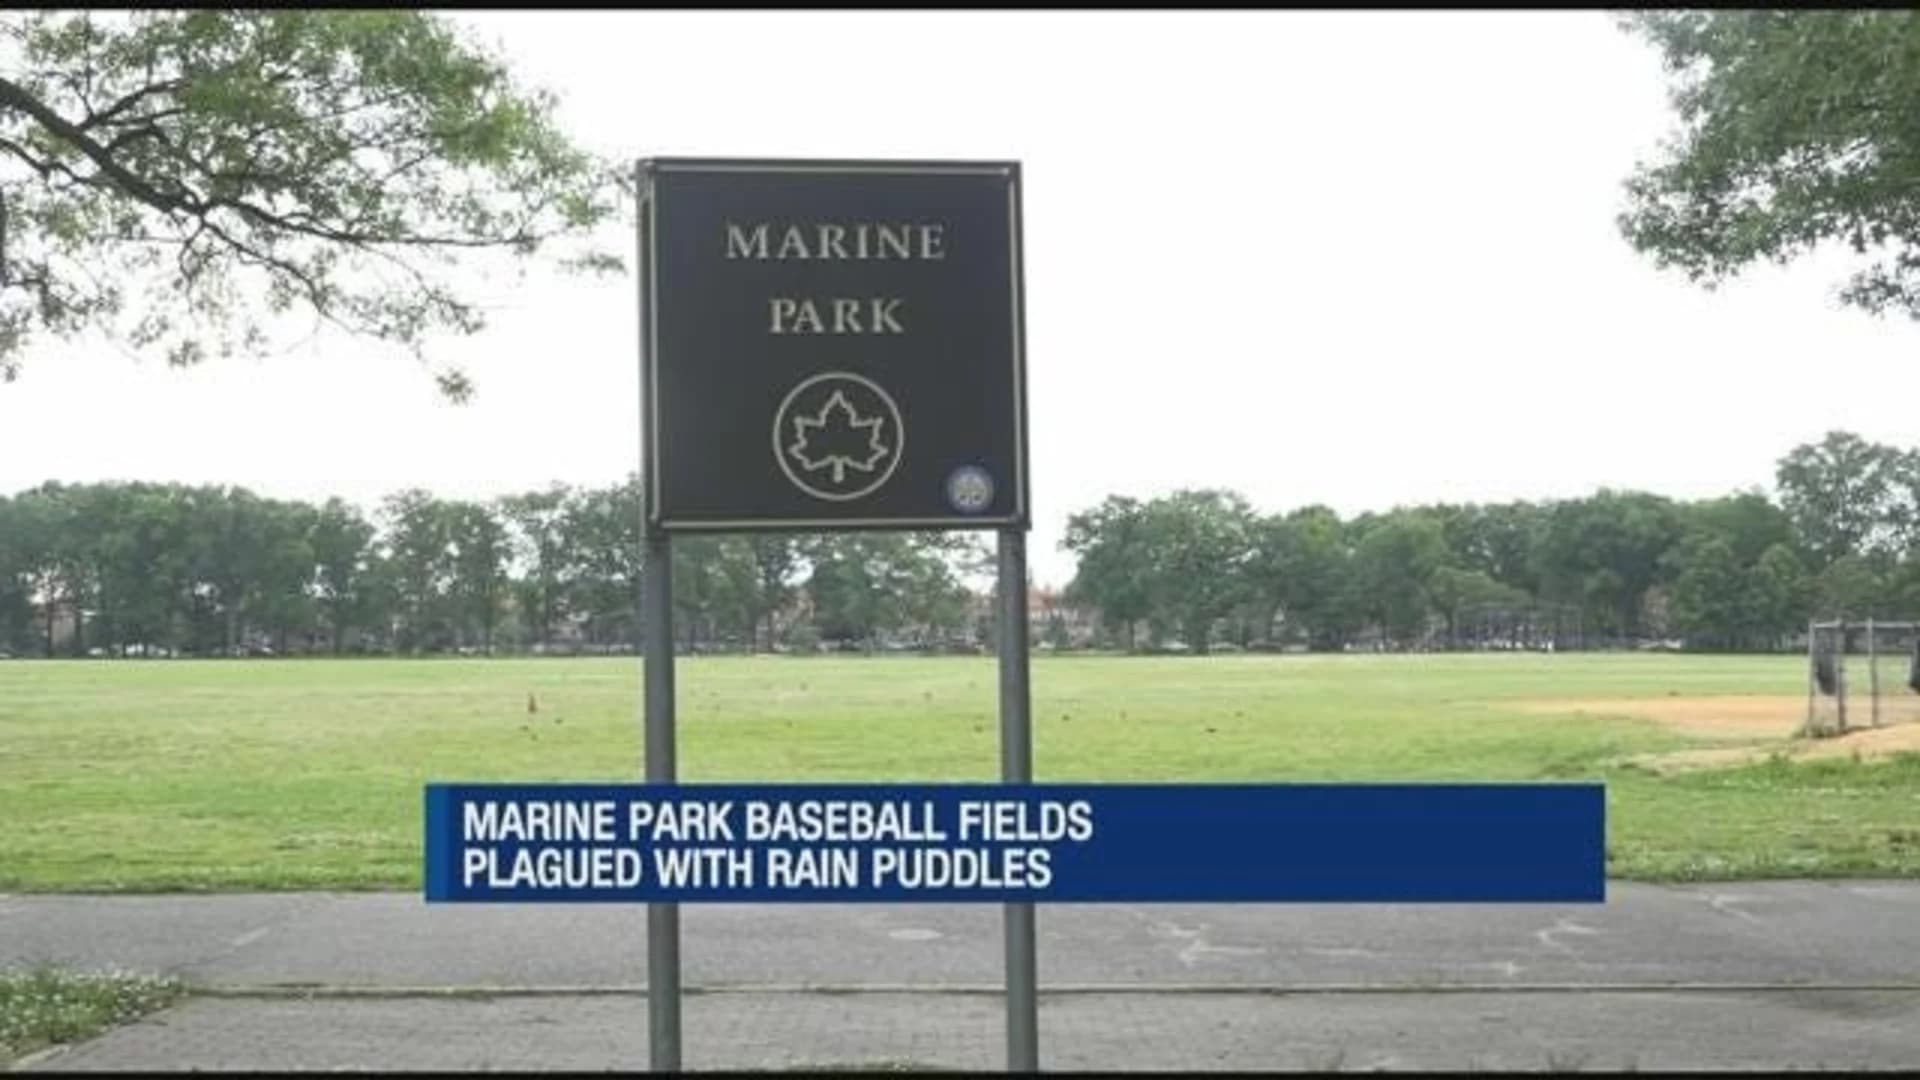 Marine Park baseball fields plagued by flooding issues